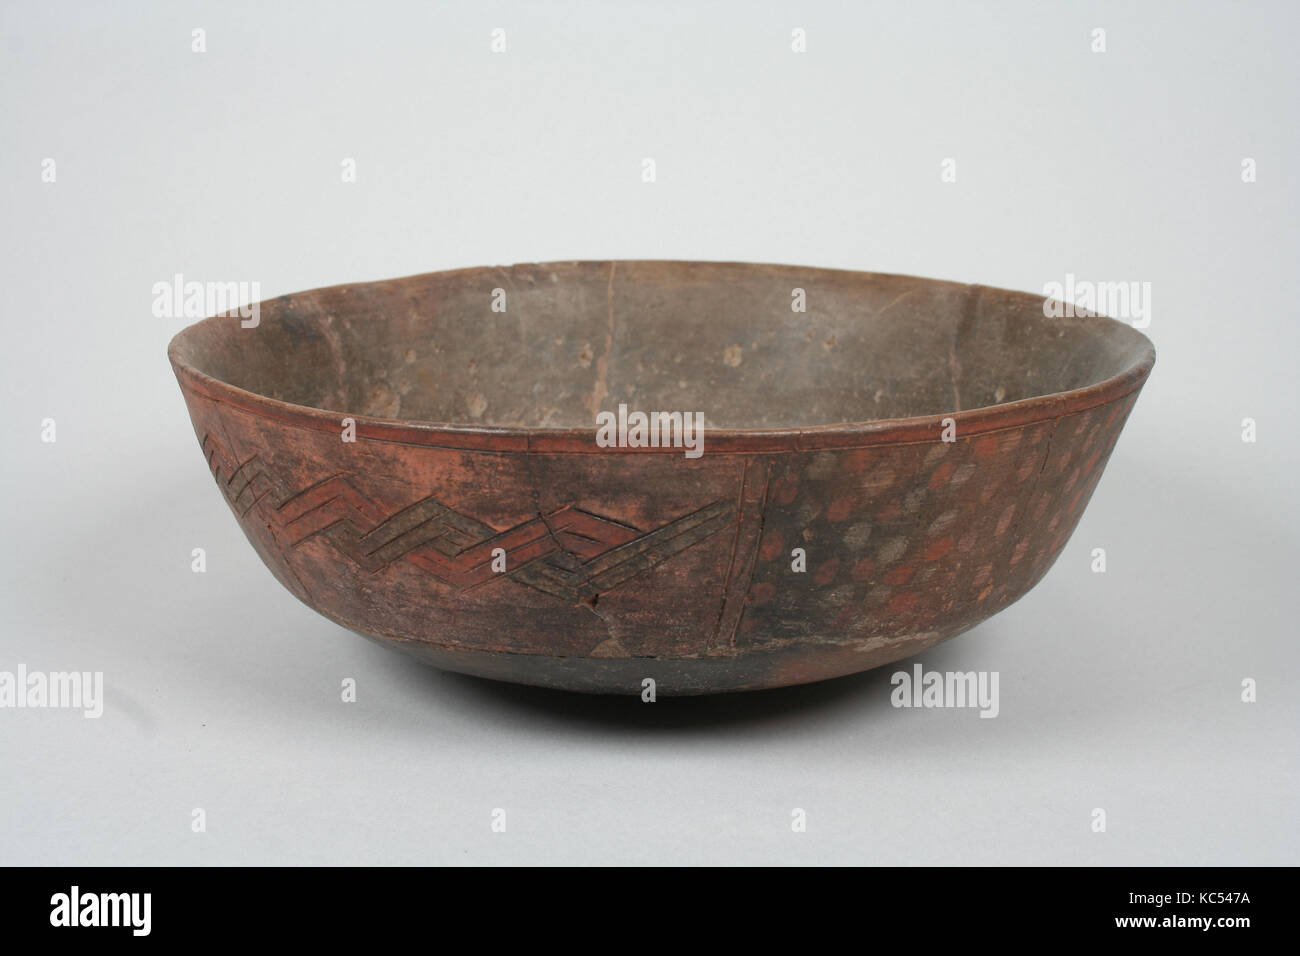 Incised bowl with dots, 5th–3rd century B.C., Peru, Paracas, Ceramic, pigment, Overall: 2 1/2 in. (6.35 cm), Ceramics-Containers Stock Photo